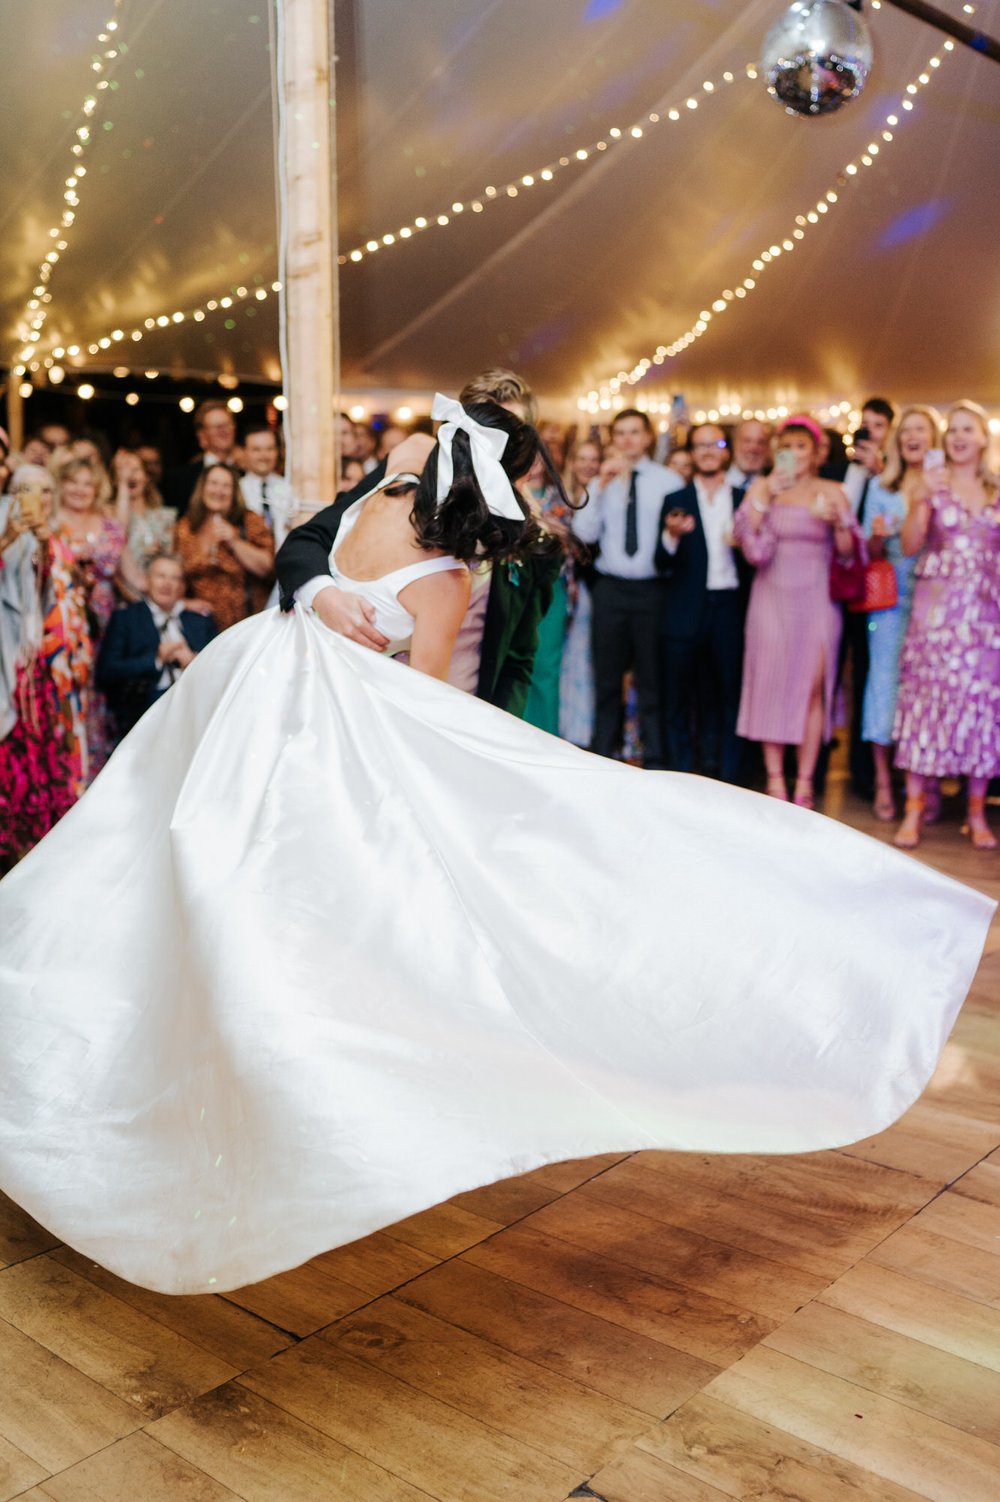 Bride's dress fans out naturally as groom has lifted her and is swirling her across the dancefloor